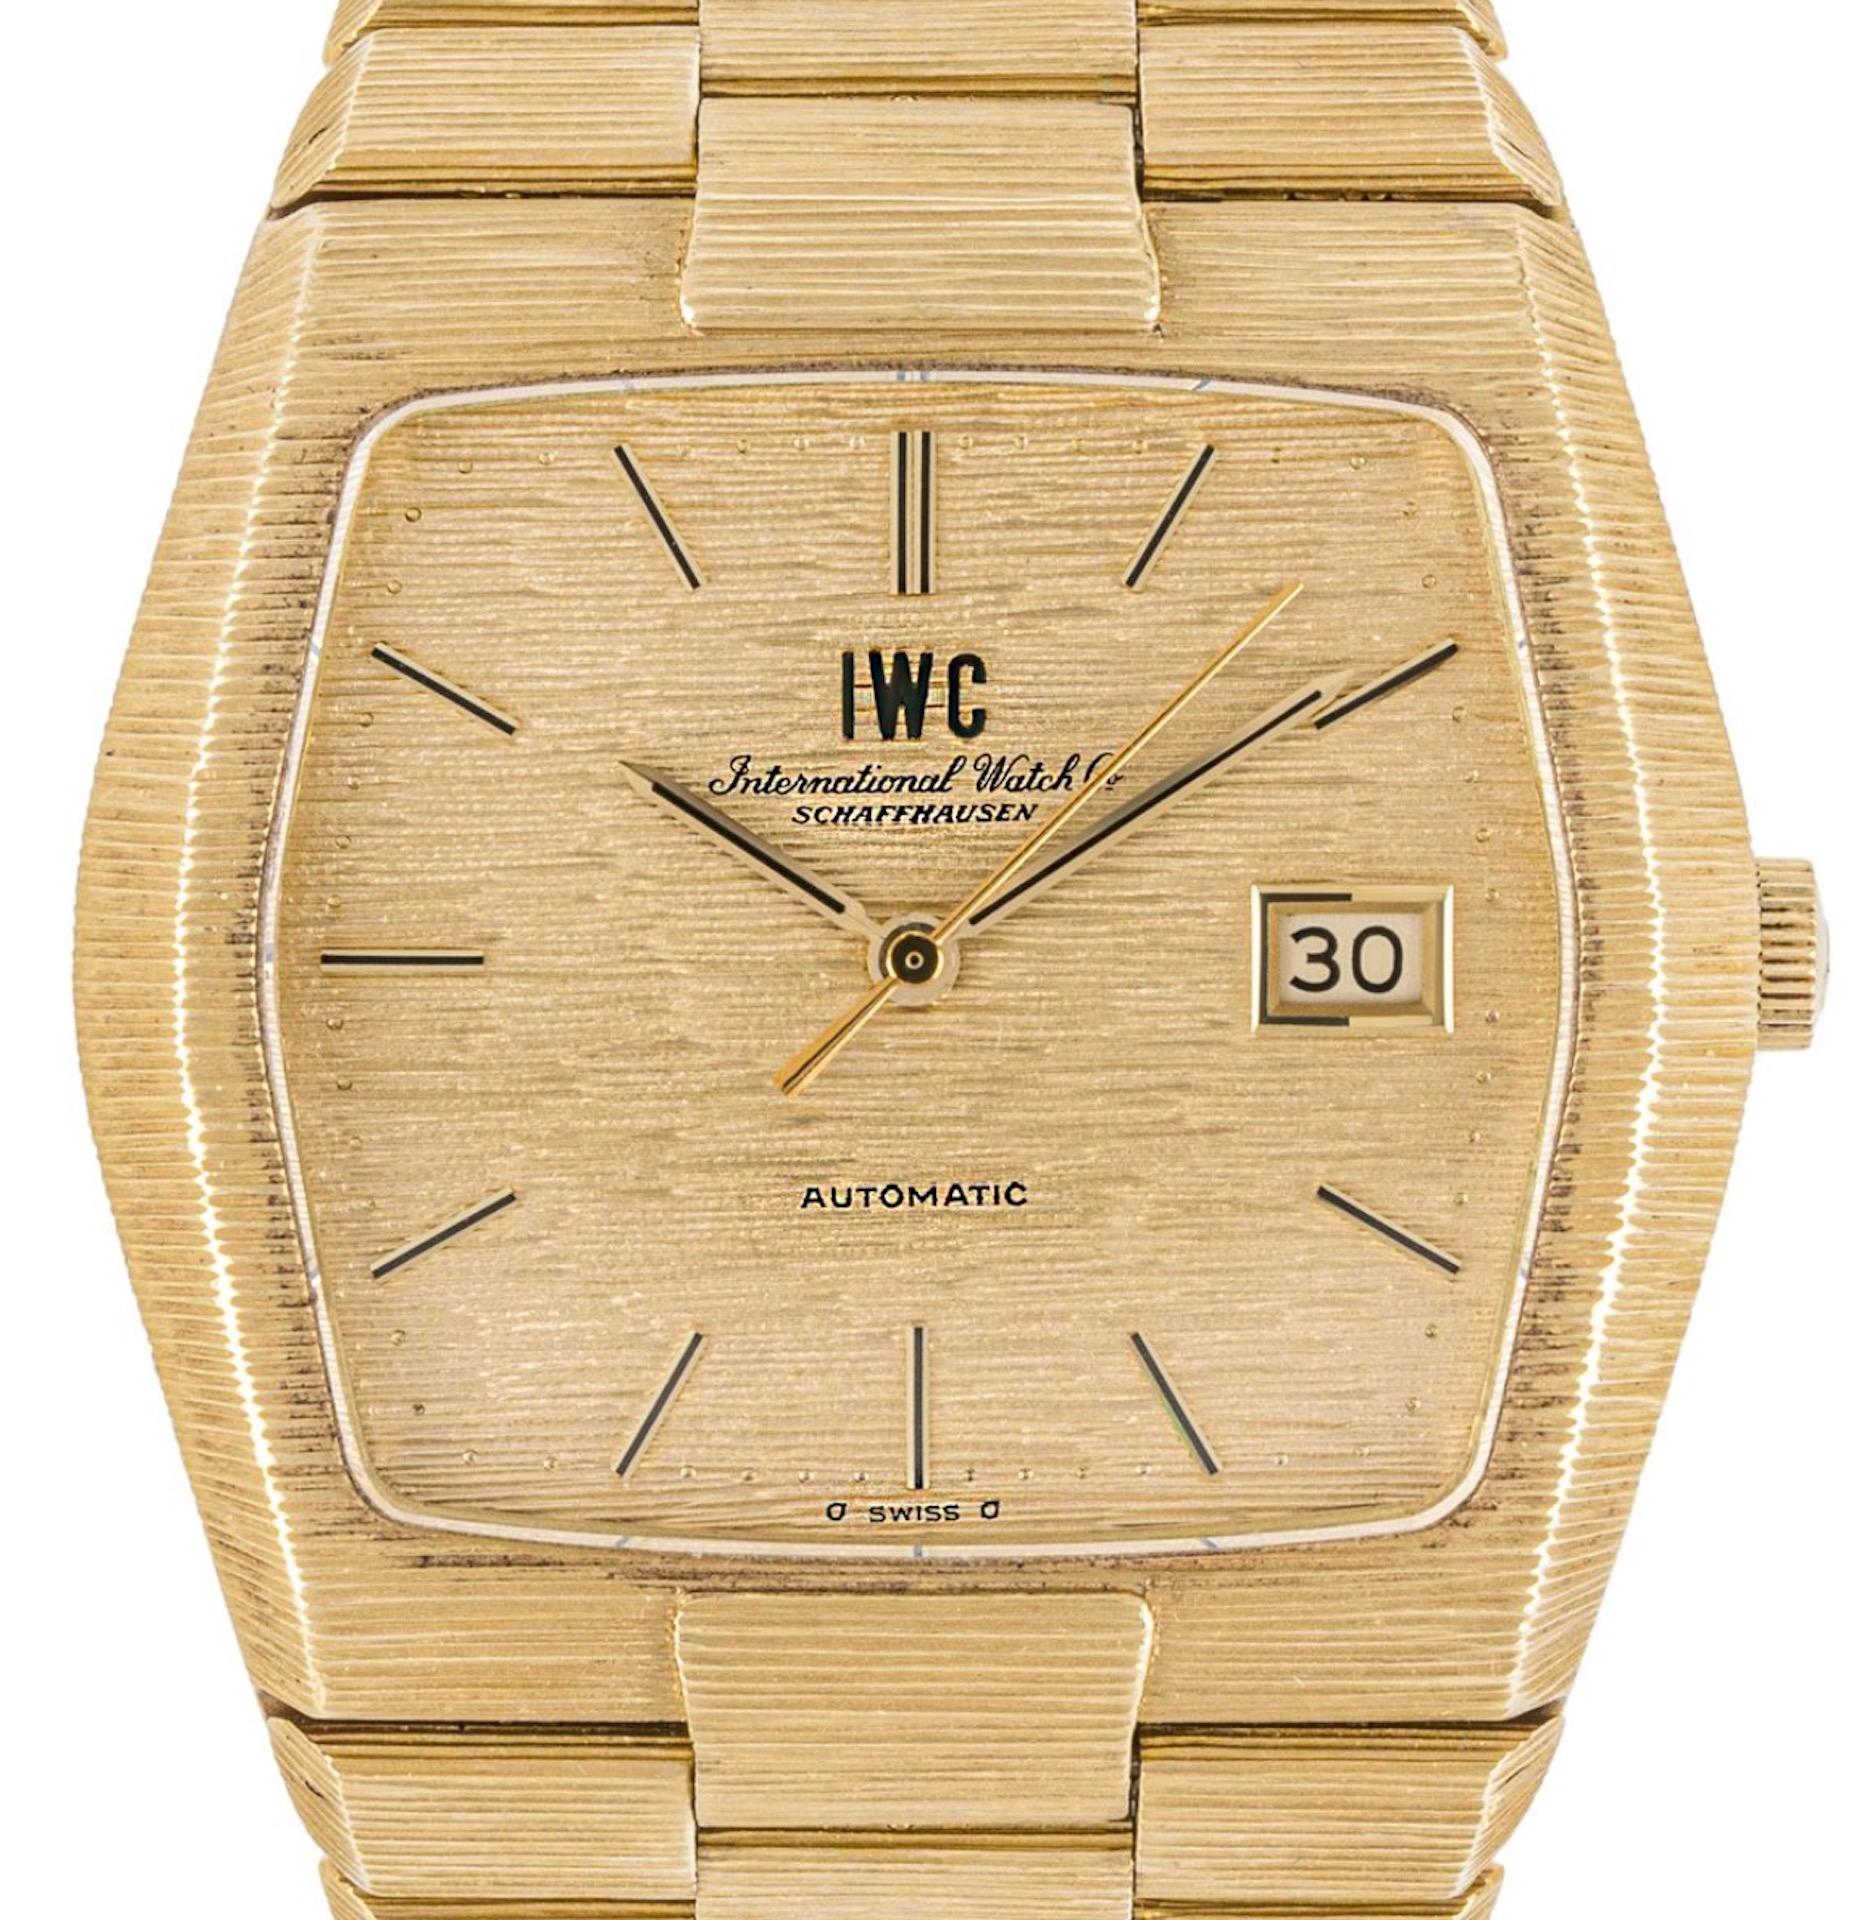 A Da Vinci IWC in bark finish featuring a tonneau-shaped case crafted in 18k yellow gold. Further features a gold dial with a date aperture and a yellow-gold bezel. Fitted with a sapphire crystal, a self-winding automatic movement and a yellow gold